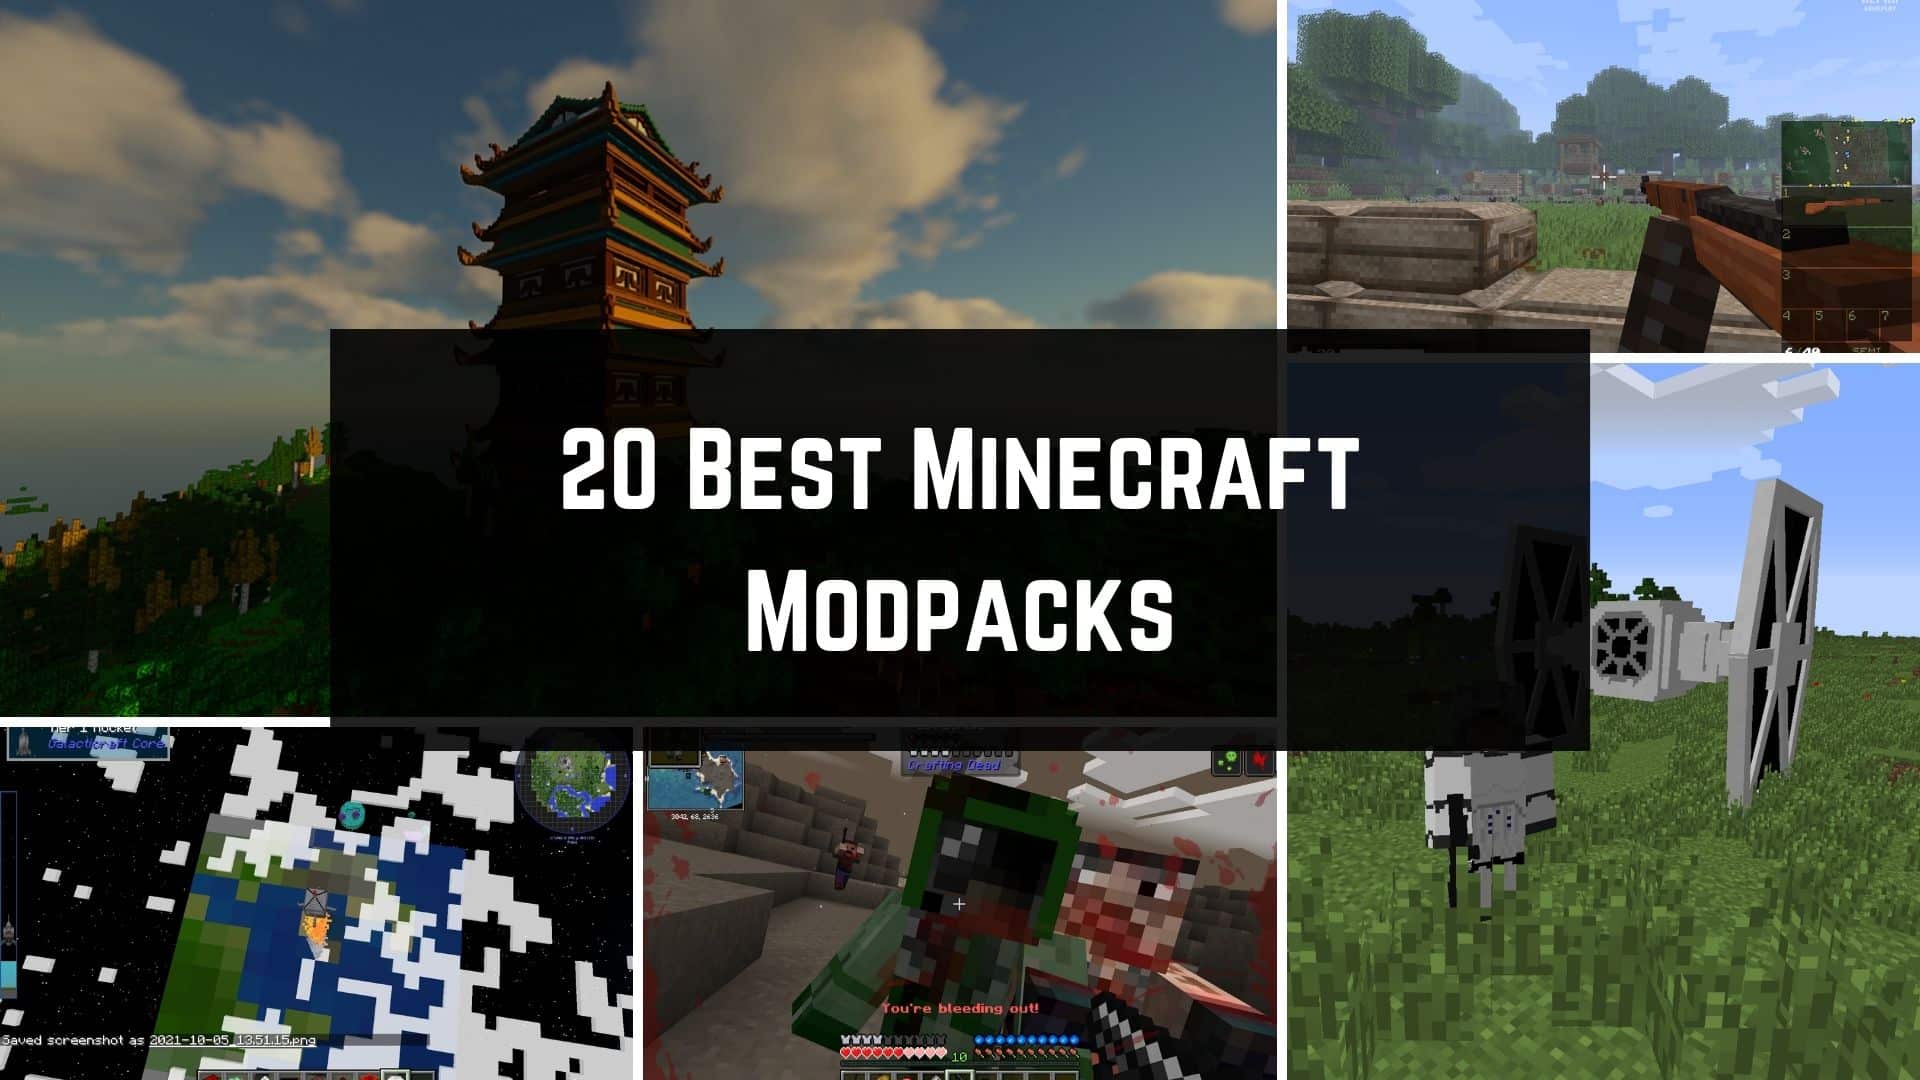 62 Popular How to install minecraft modpacks without curseforge Trend in This Years